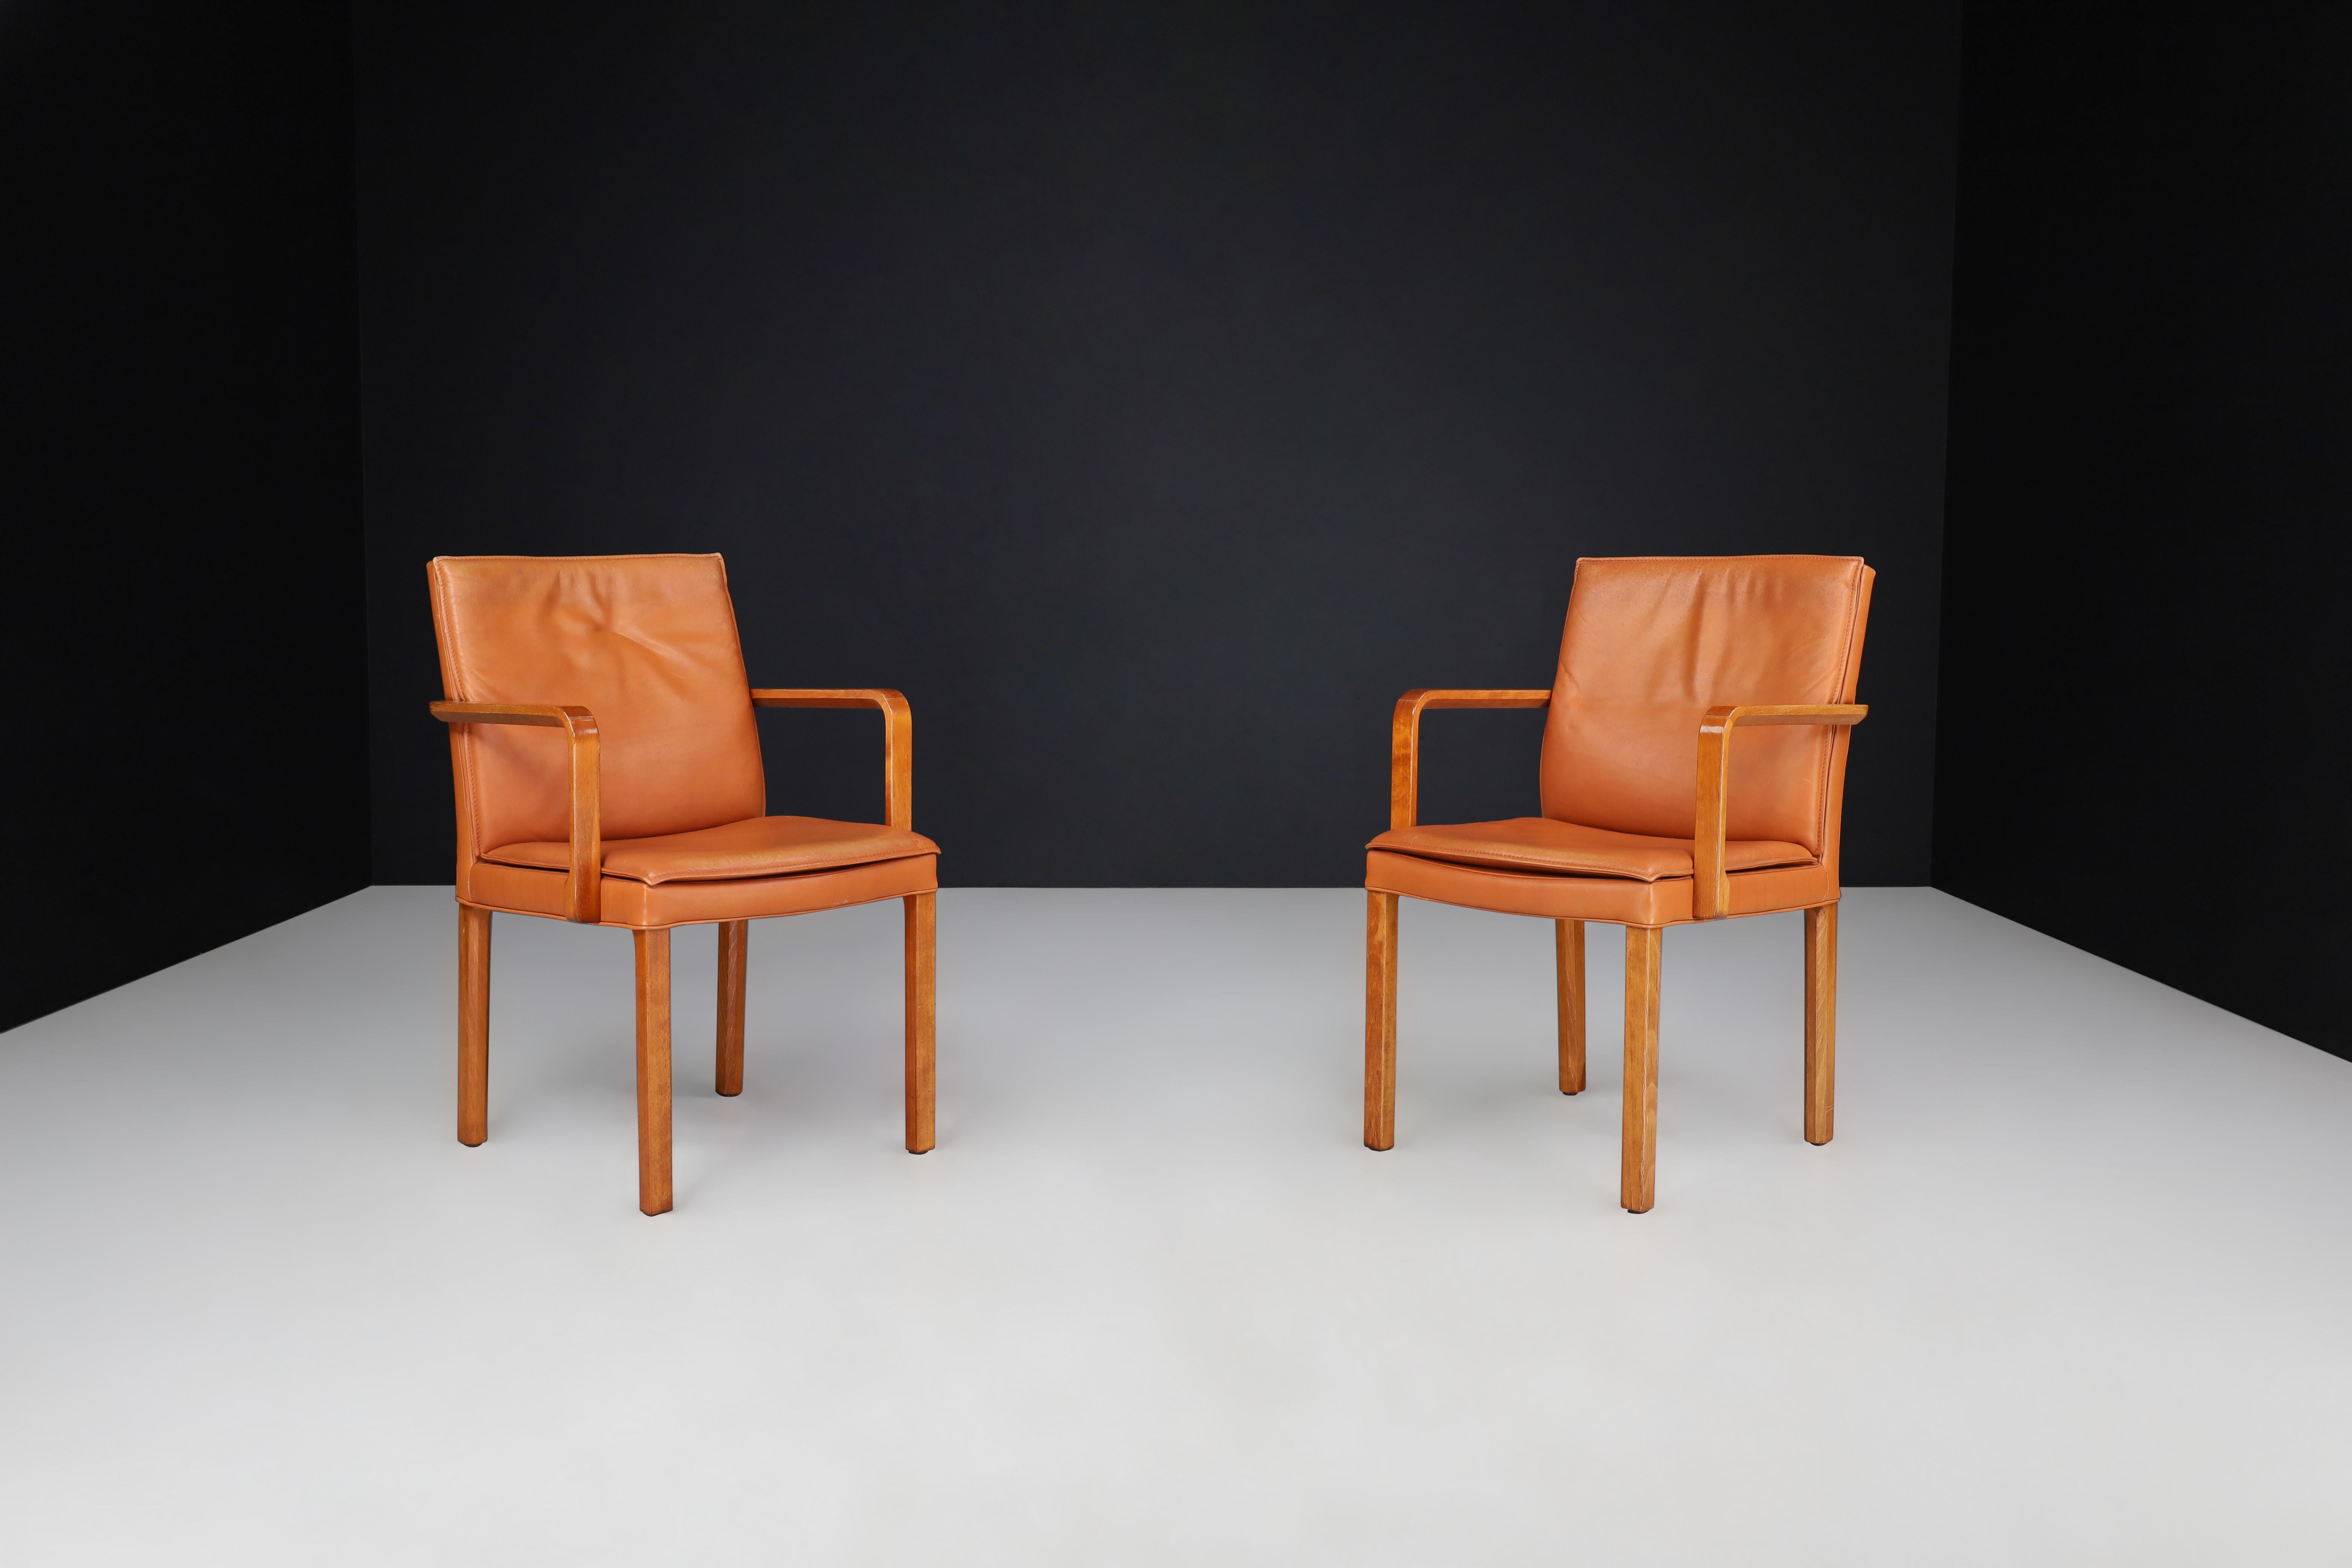 Walter Knoll Pair of two Arm chairs in Bentwood and Cognac Leather, Germany 1970s

This set of two modern armchairs or side chairs was manufactured by Walter Knoll in Germany during the 1970s and has been upholstered in luxurious cognac leather.